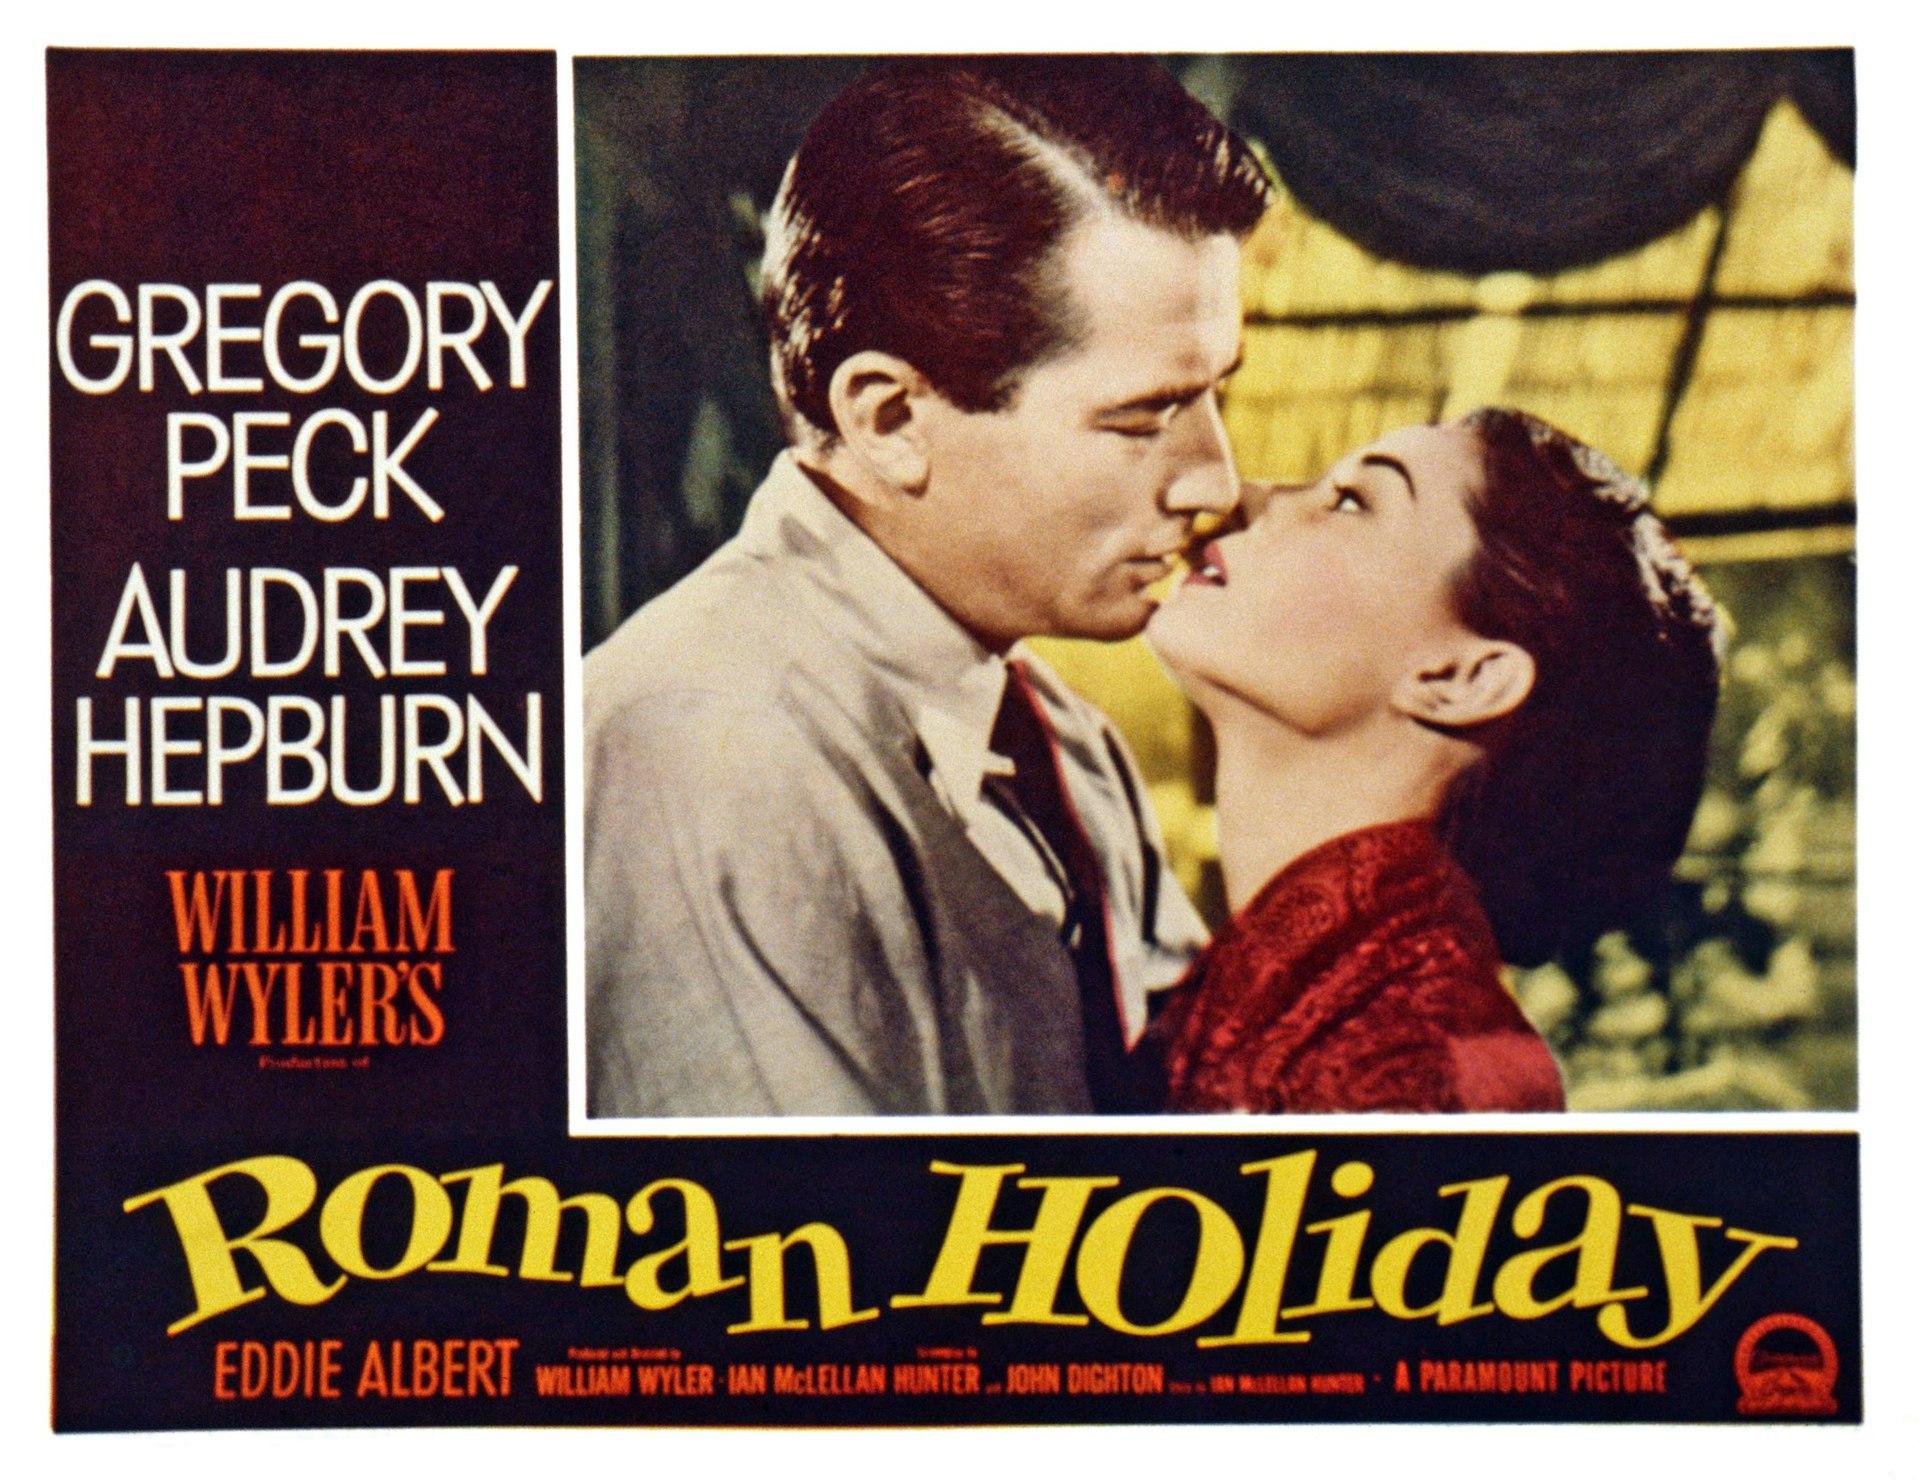 Movie poster of Gregory Peck and Audrey Hepburn for the movie Roman Holiday.